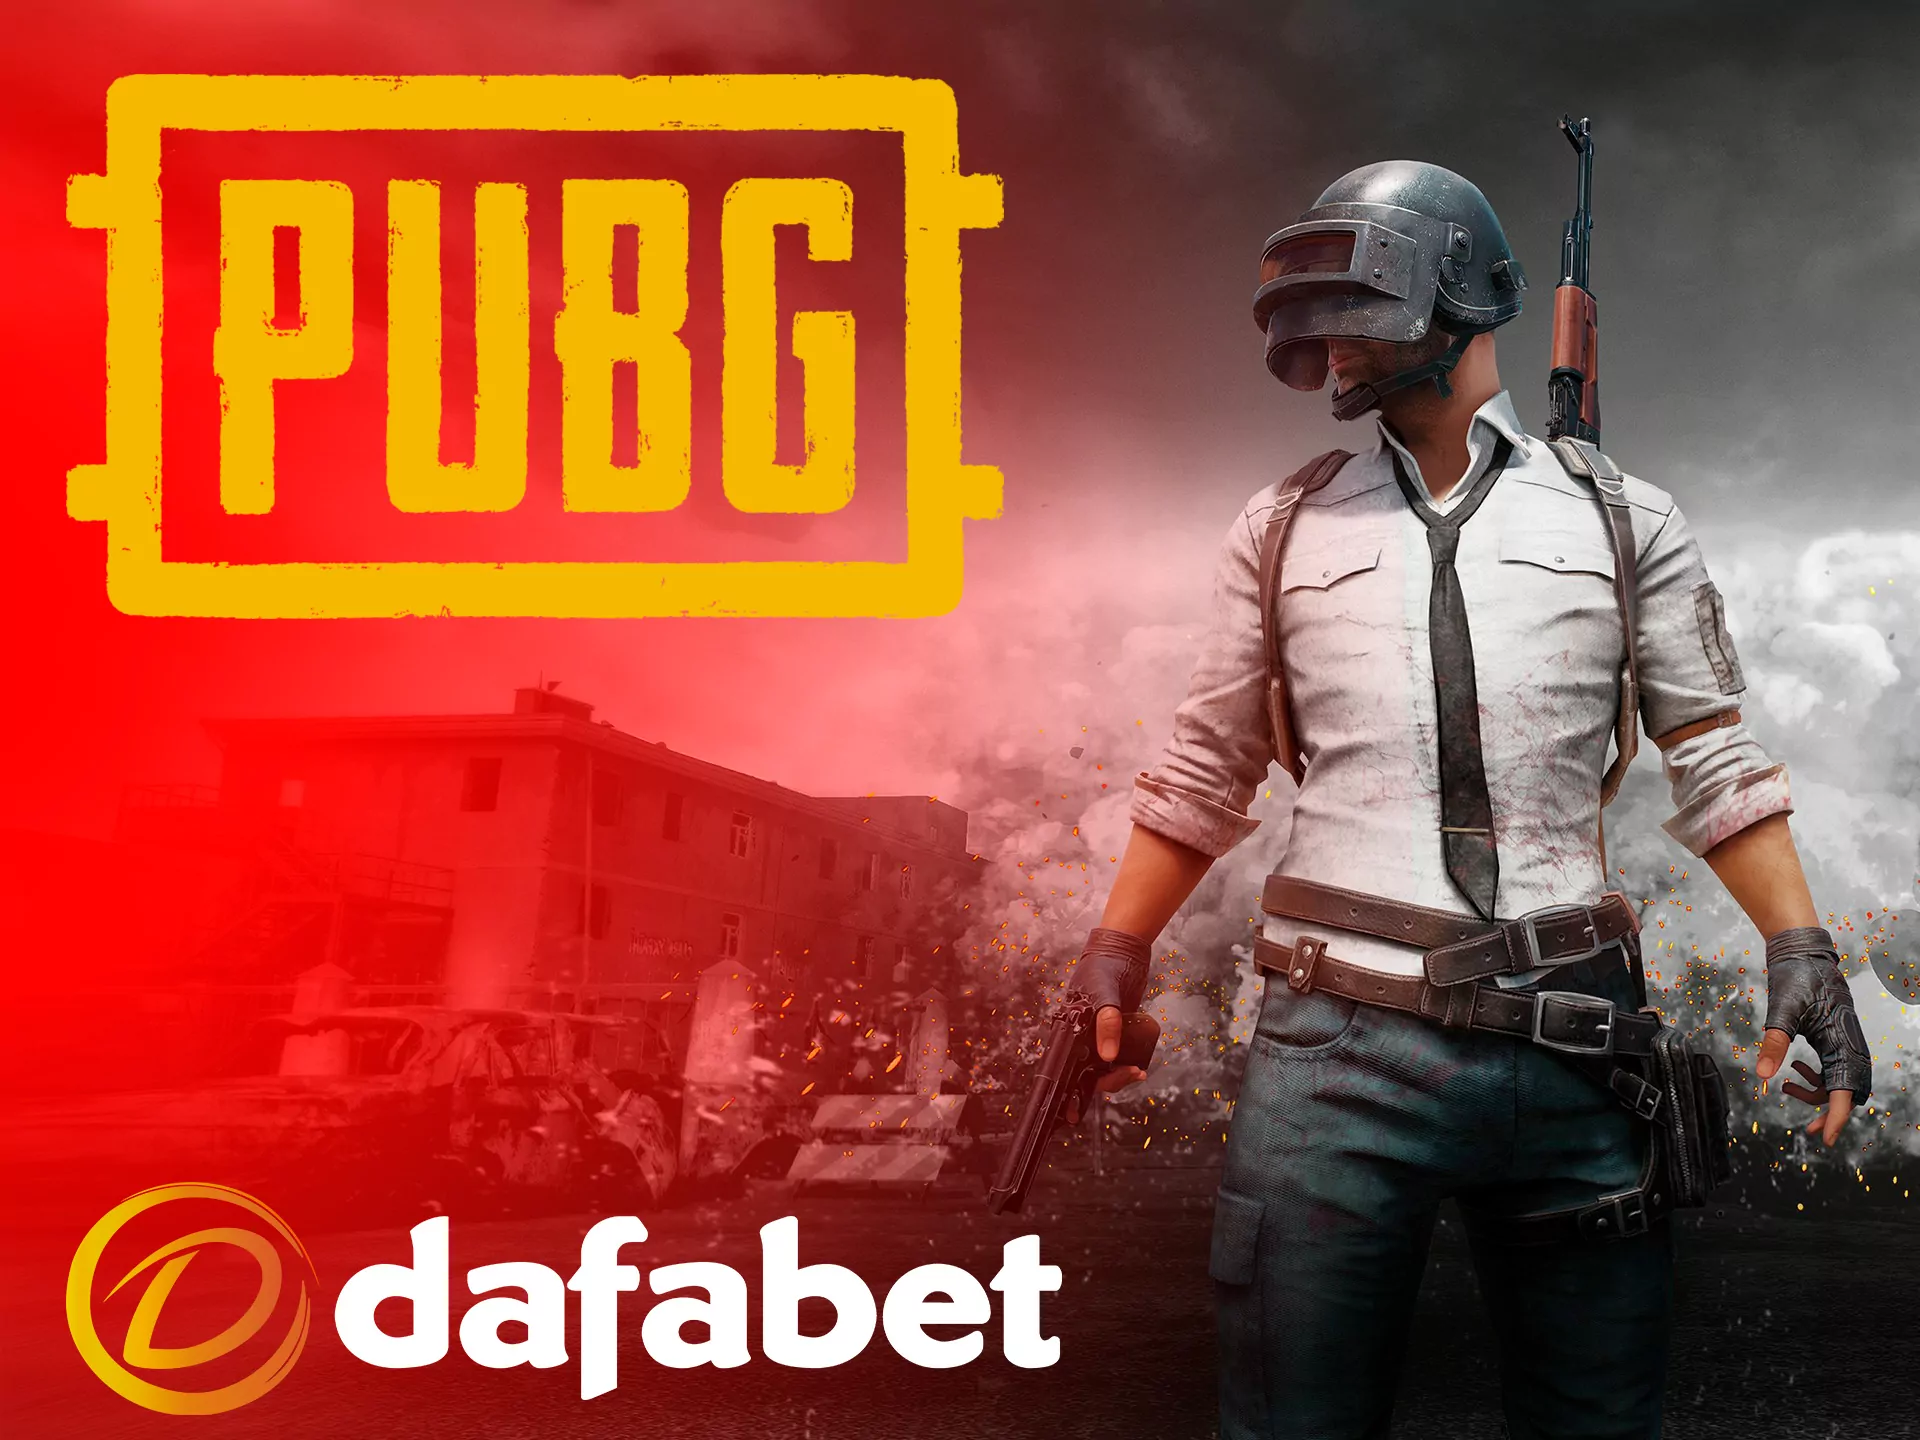 Pubg fans will be able to place bets on the winner, first place, number of kills and other types of bets.